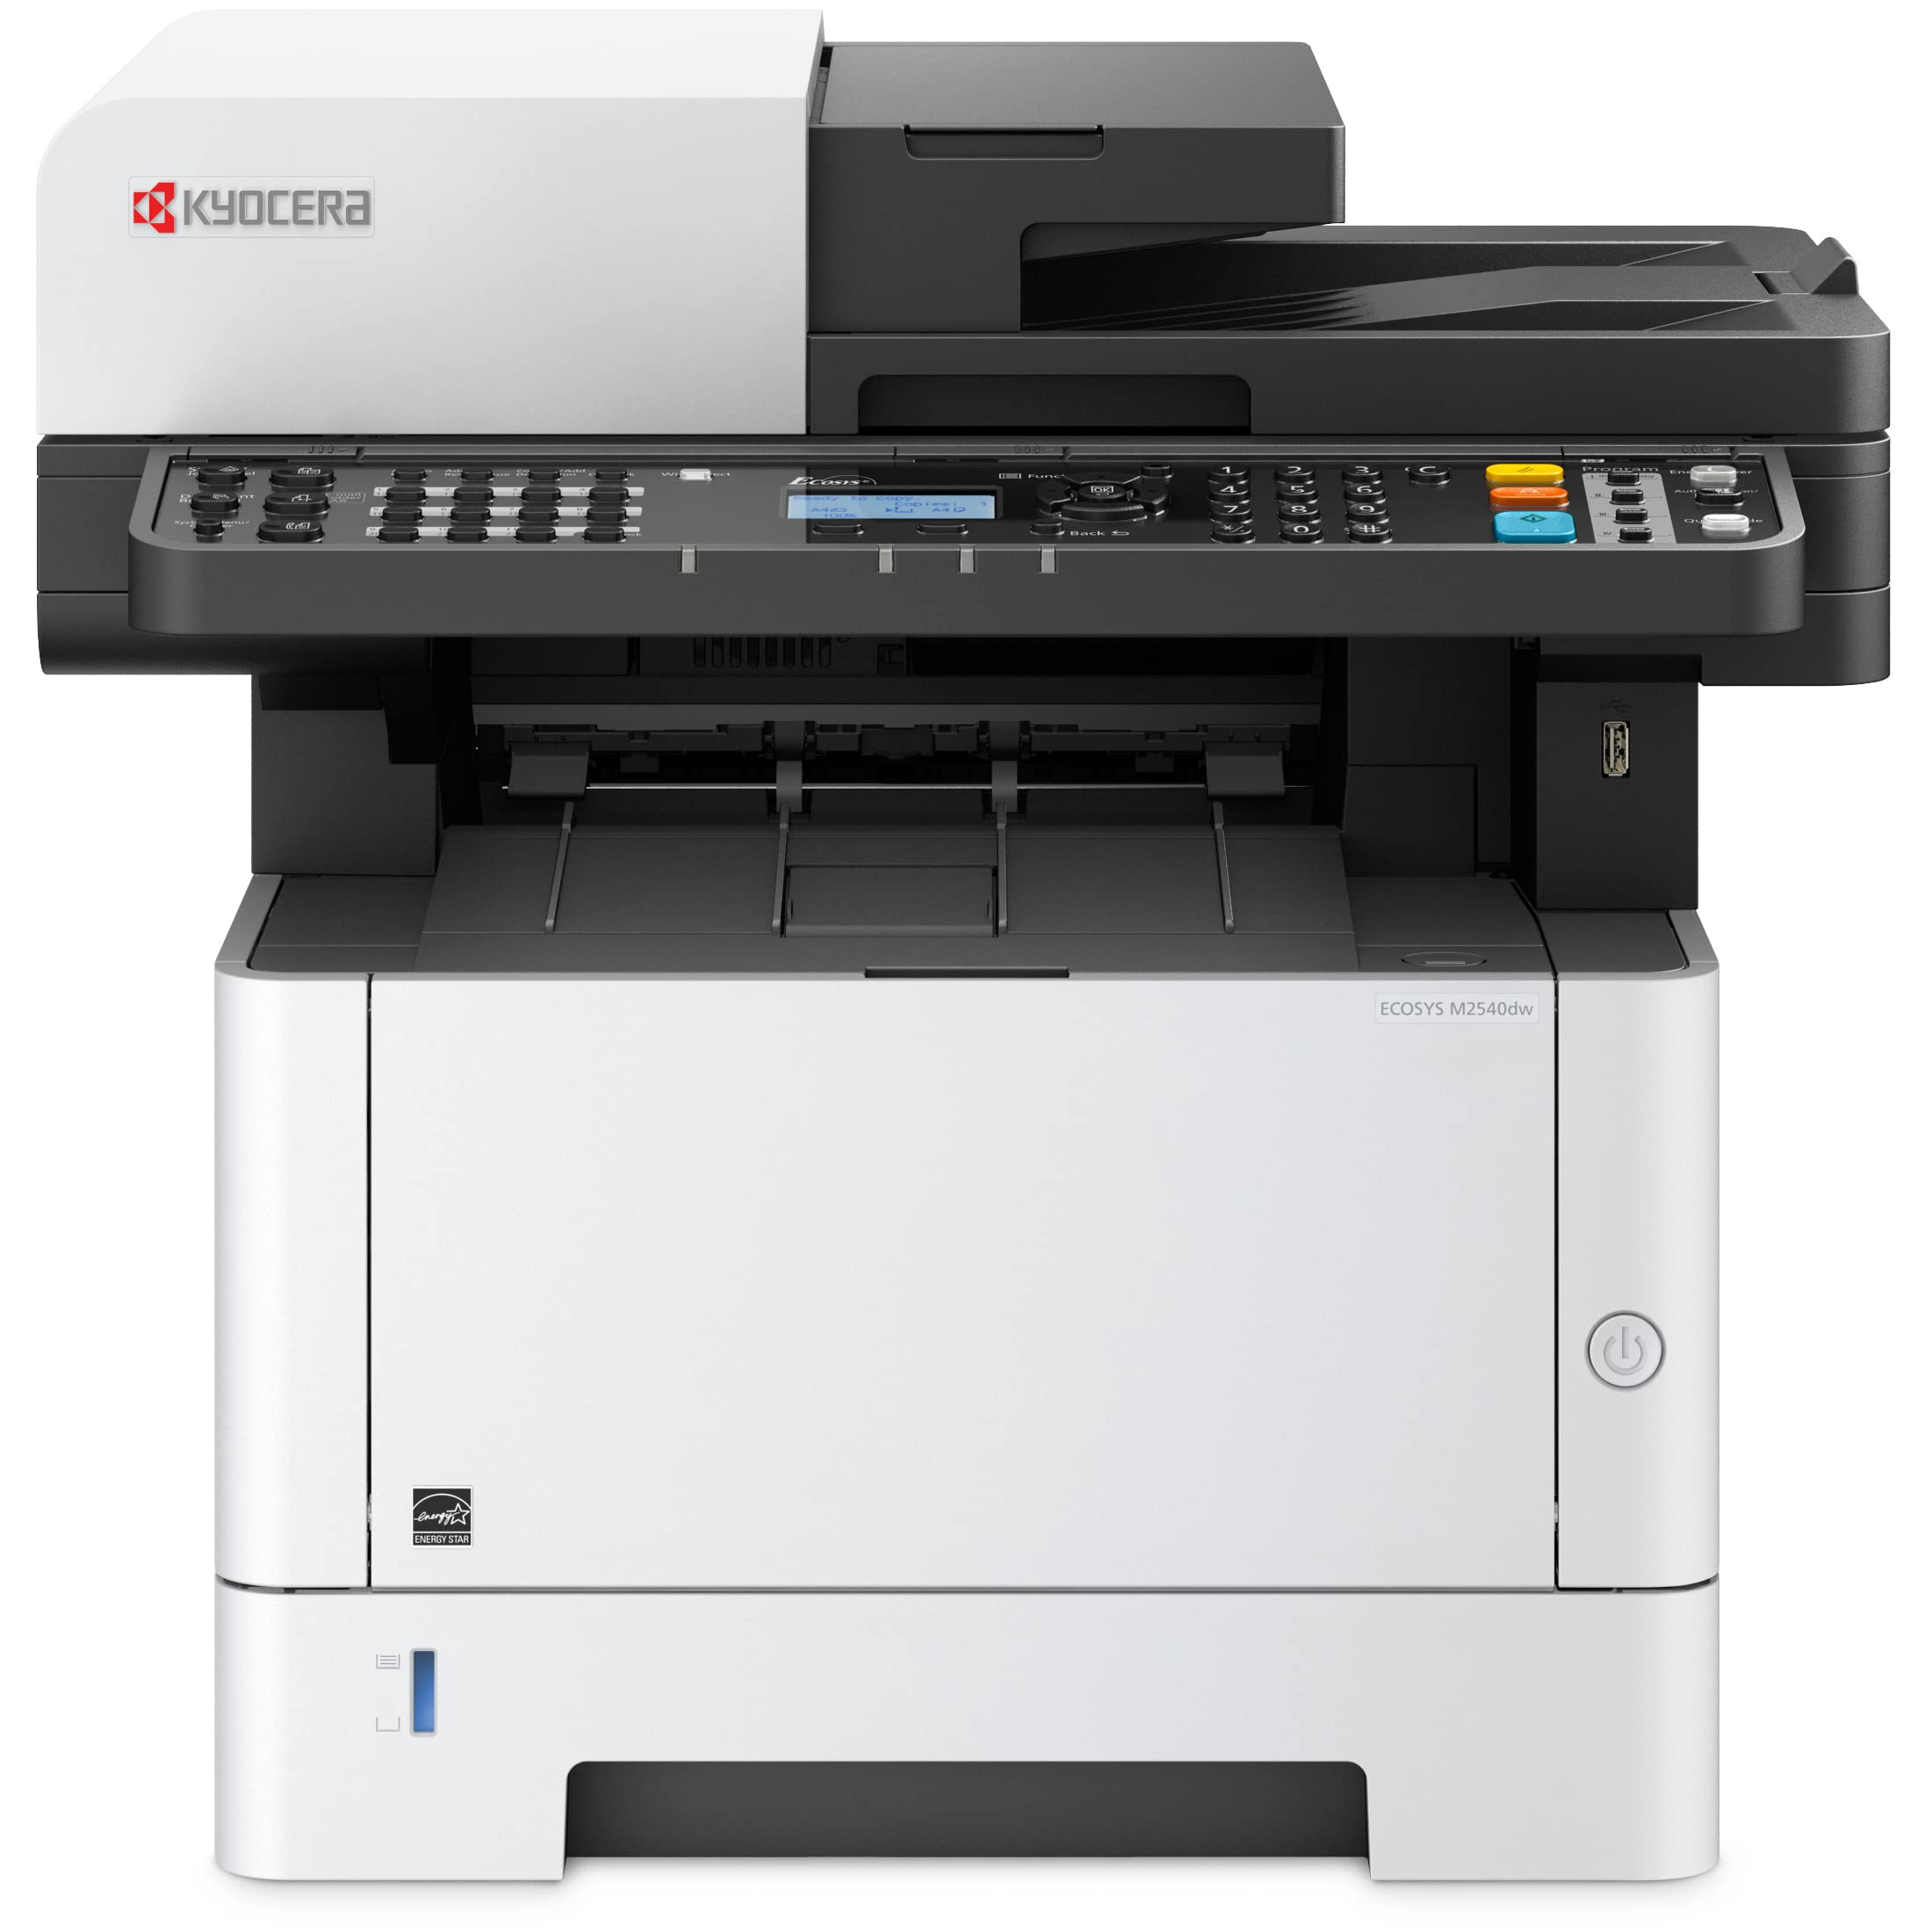  KYOCERA DOCUMENT SOLUTIONS ECOSYS M2540dw All-in-One Monochrome Laser Printer (Print/Copy/Scan/Fax), 42 ppm, Up to Fine 1200dpi, Gigabit Ethernet, USB, Wireless & Wi-Fi Direct, Mobile Print, 5 Line...